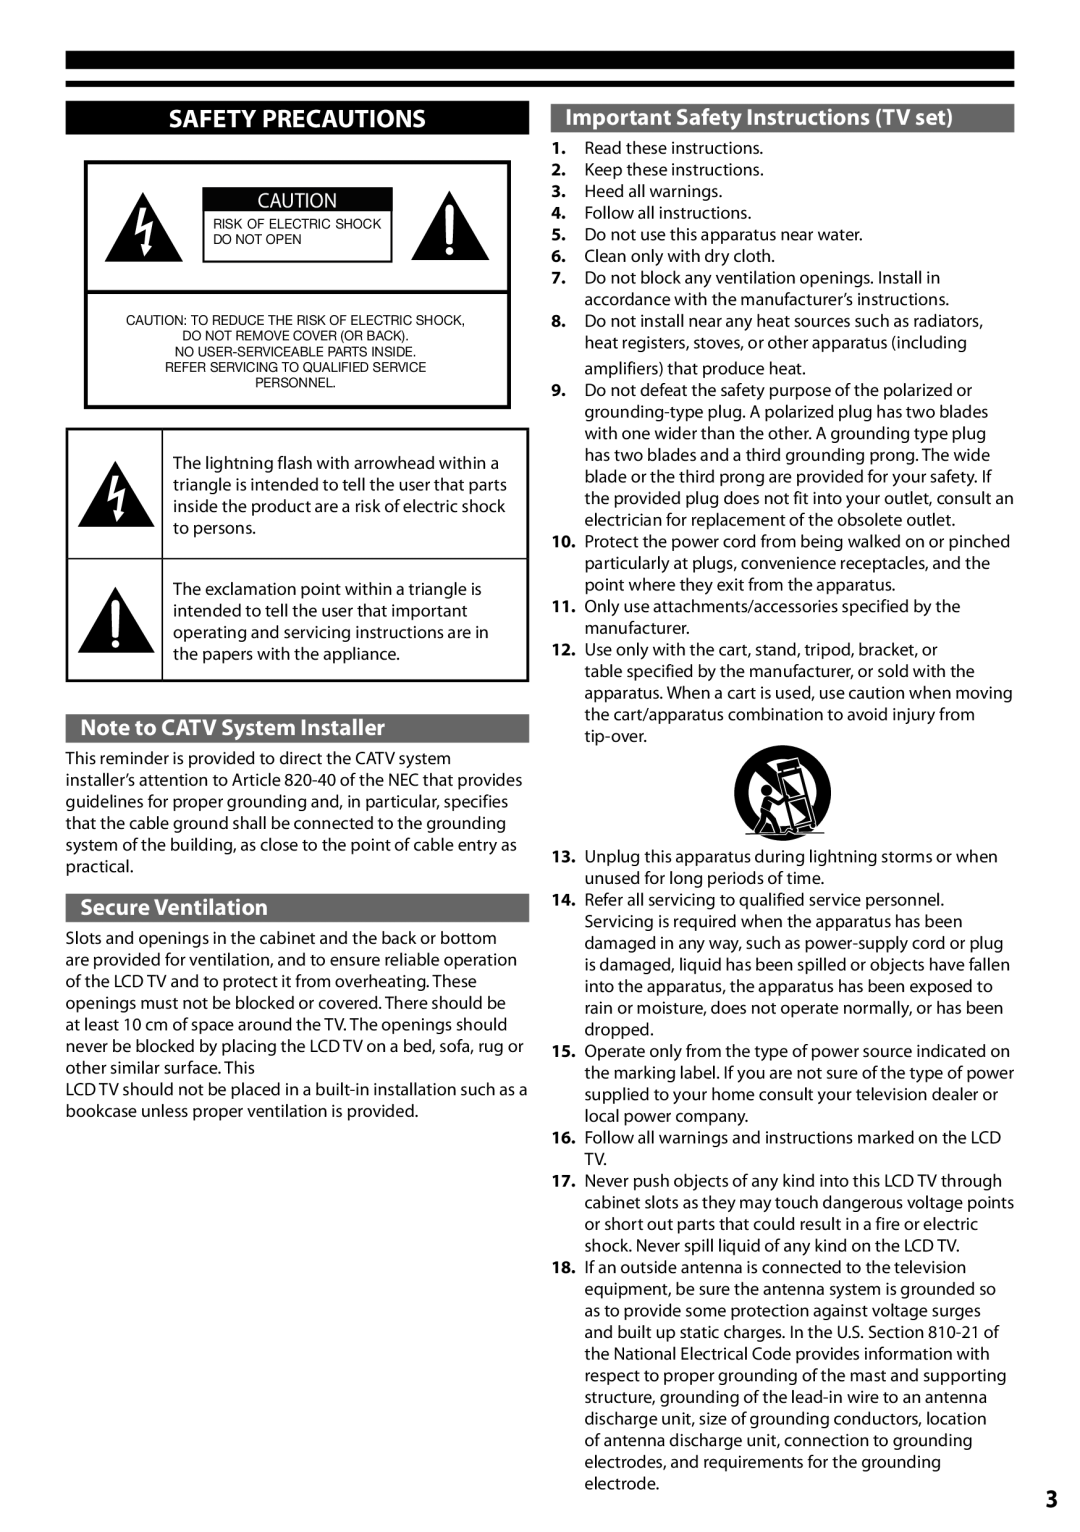 Panasonic TC-L24X5 owner manual Safety Precautions, Note to CATV System Installer, Secure Ventilation 